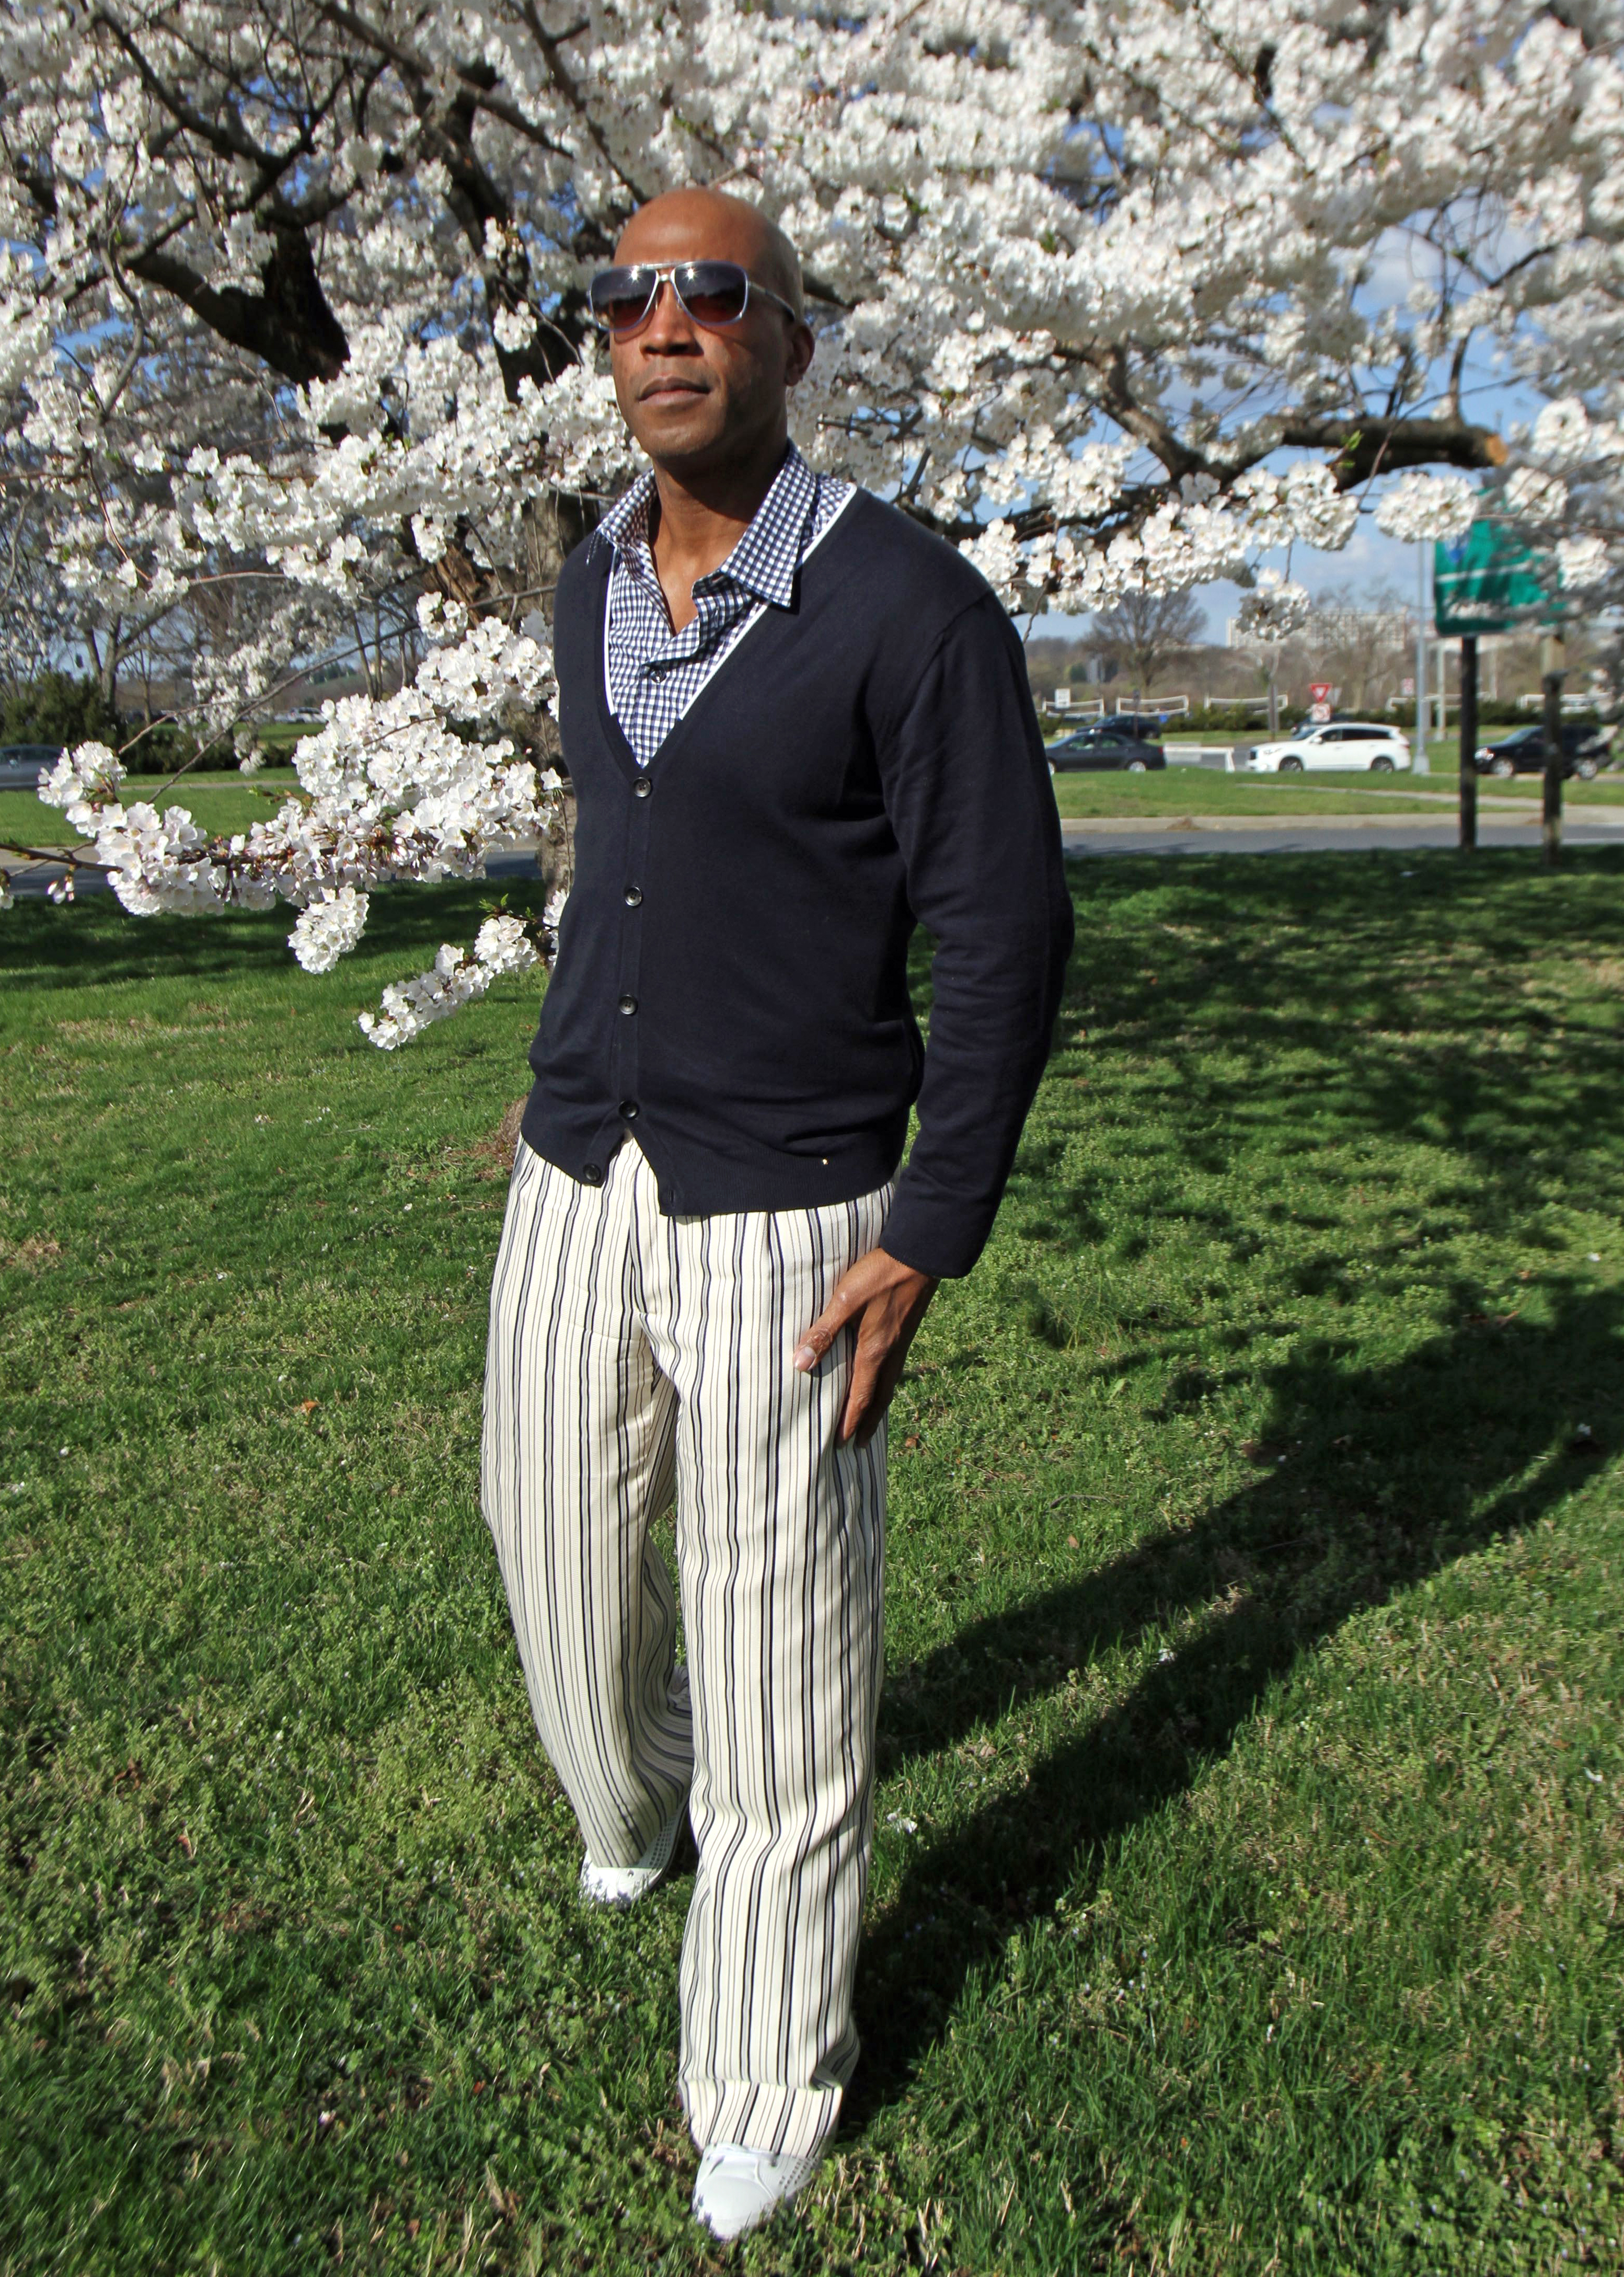 The Beauty of the Blossoms - The DCFashion Fool